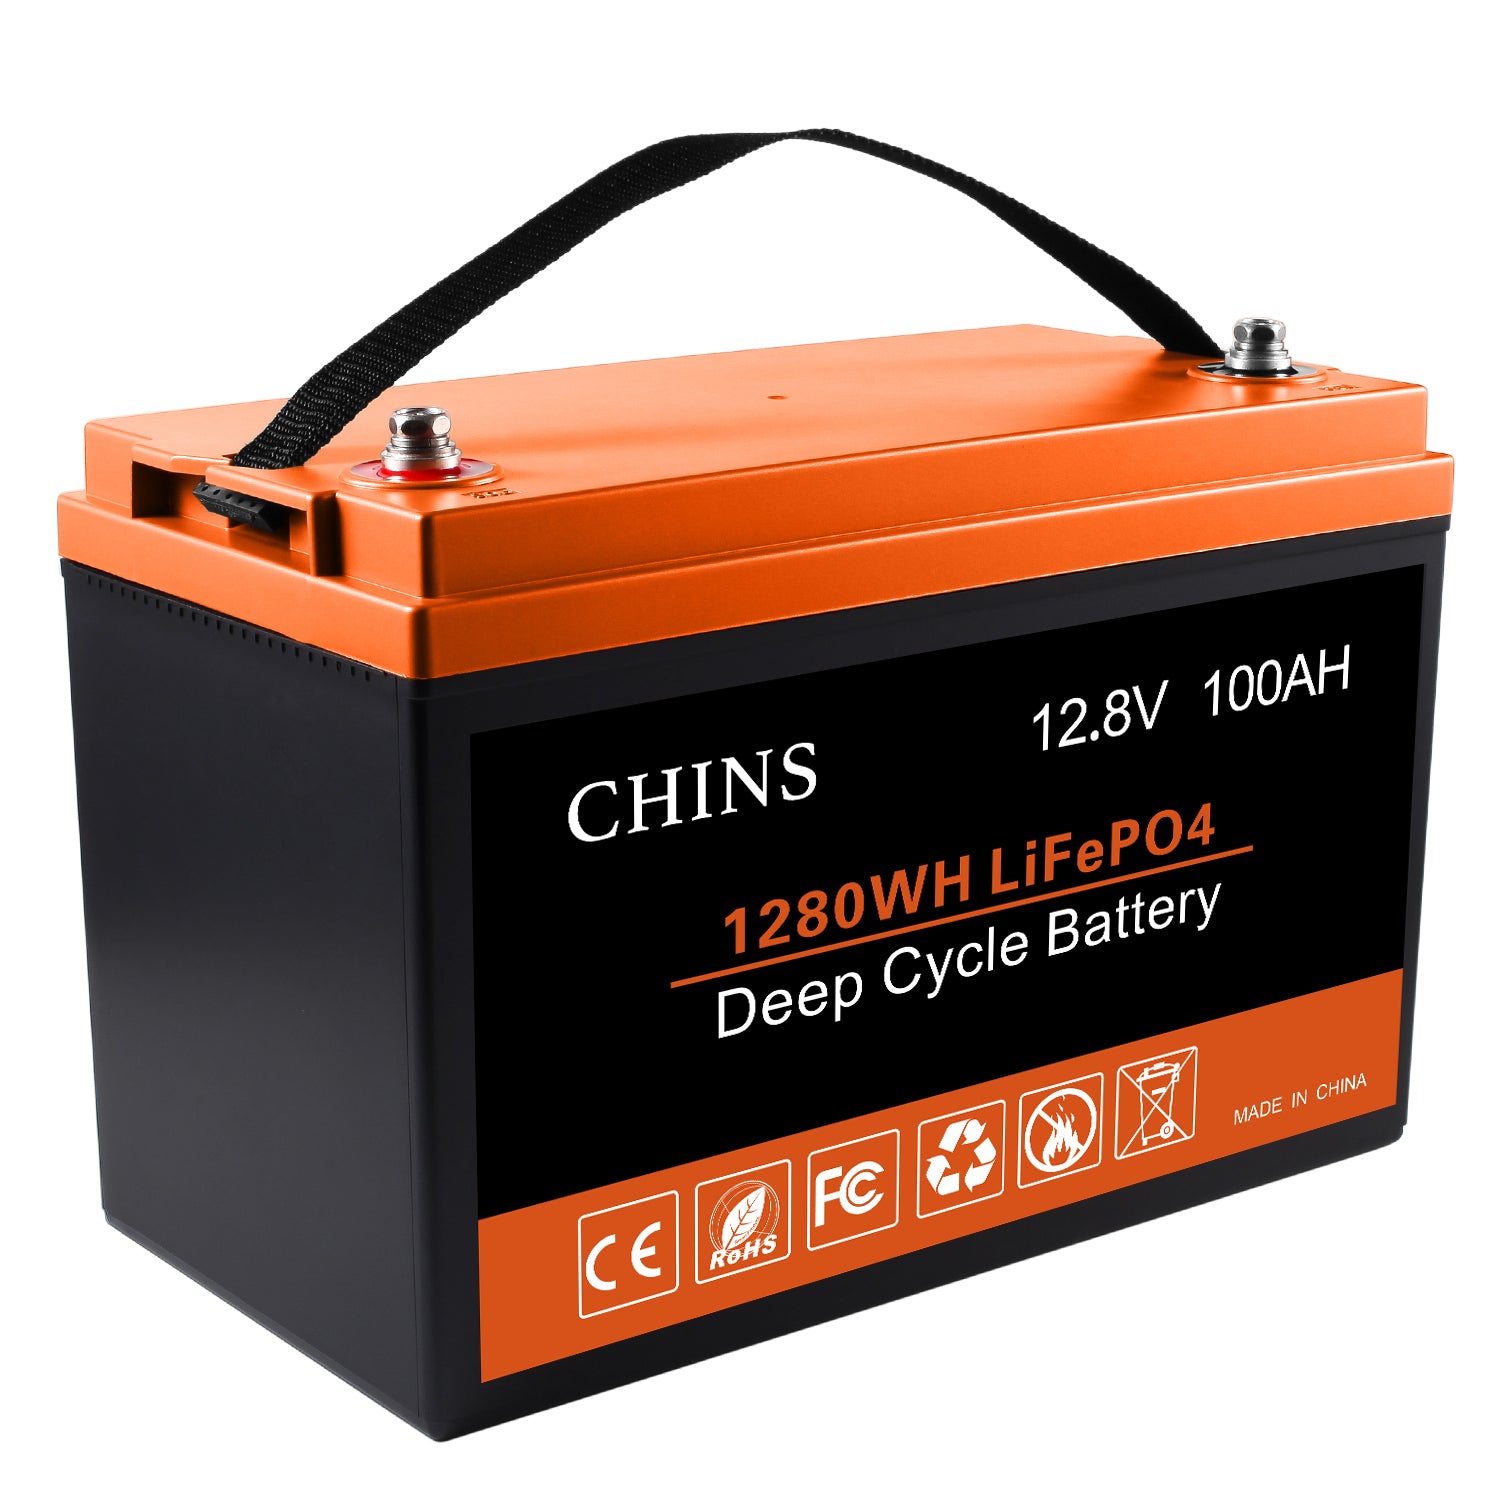 CHINS LiFePO4 Lithium Iron Battery 12V 300Ah for solar home